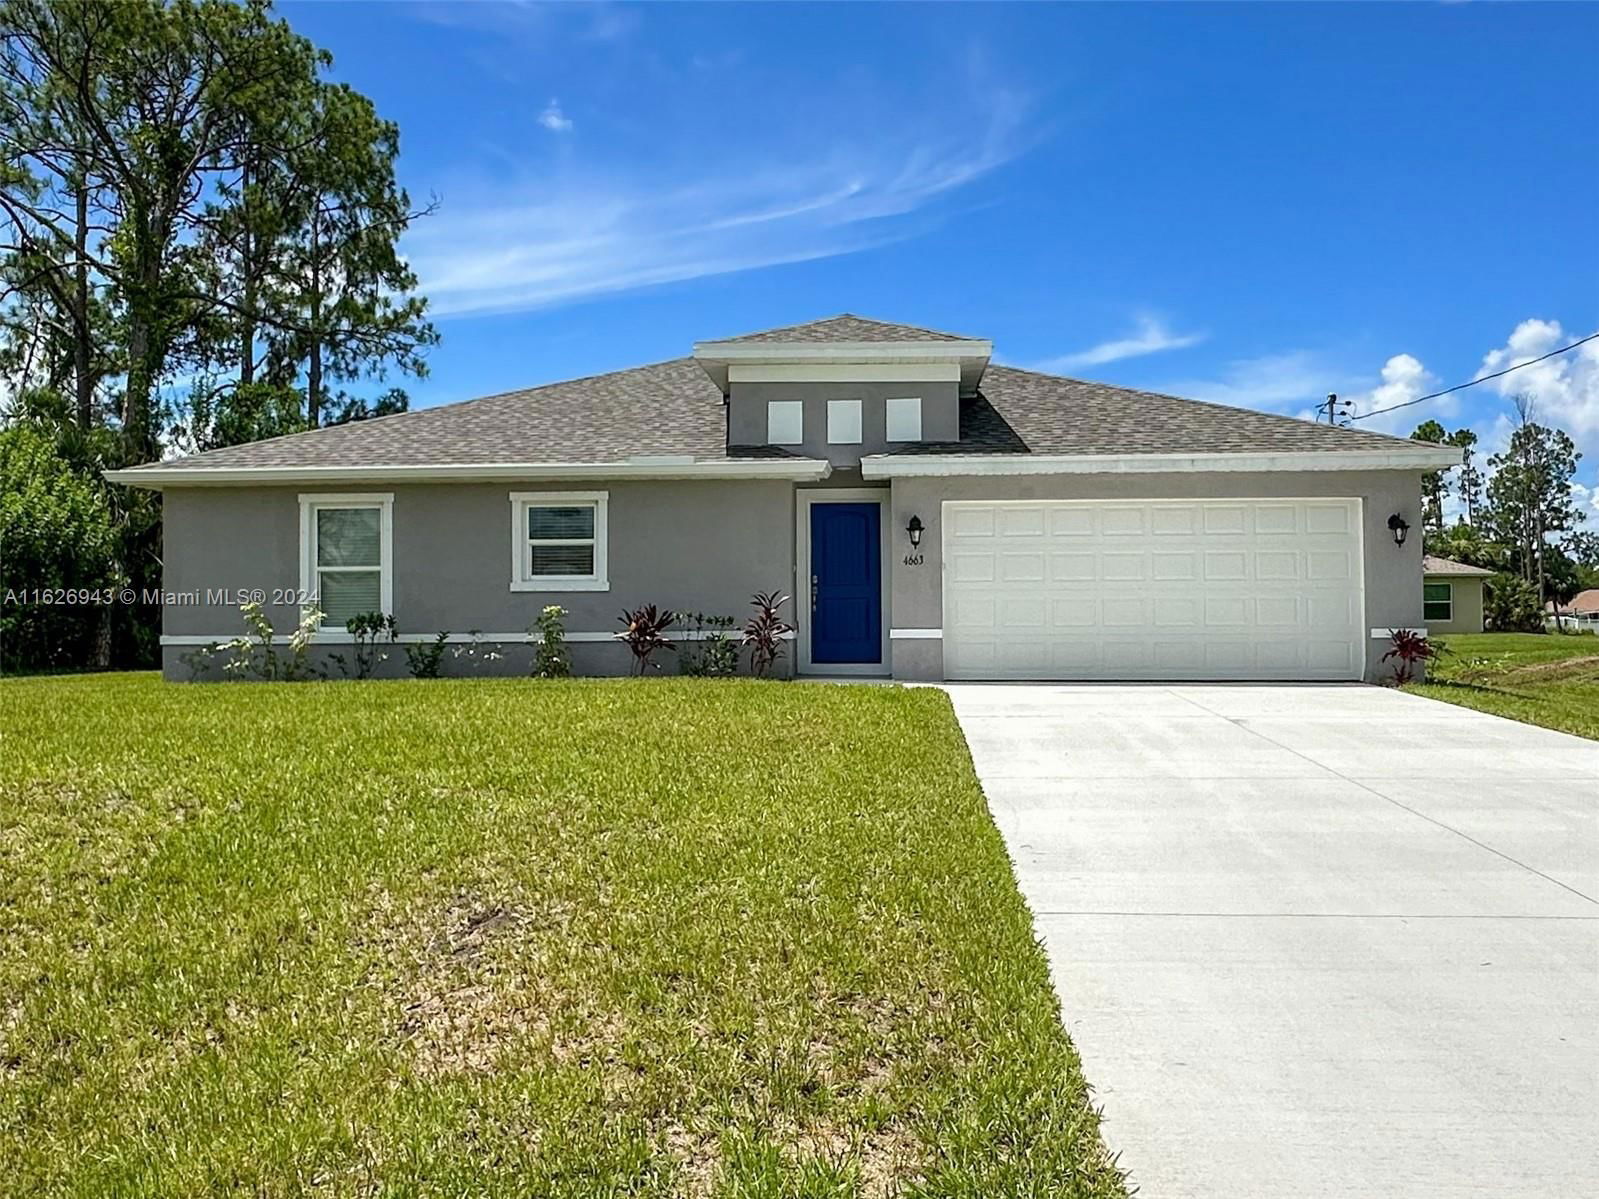 Real estate property located at 4663 CARRIZAL, Sarasota County, Port Charlotte Sub 49, North Port, FL